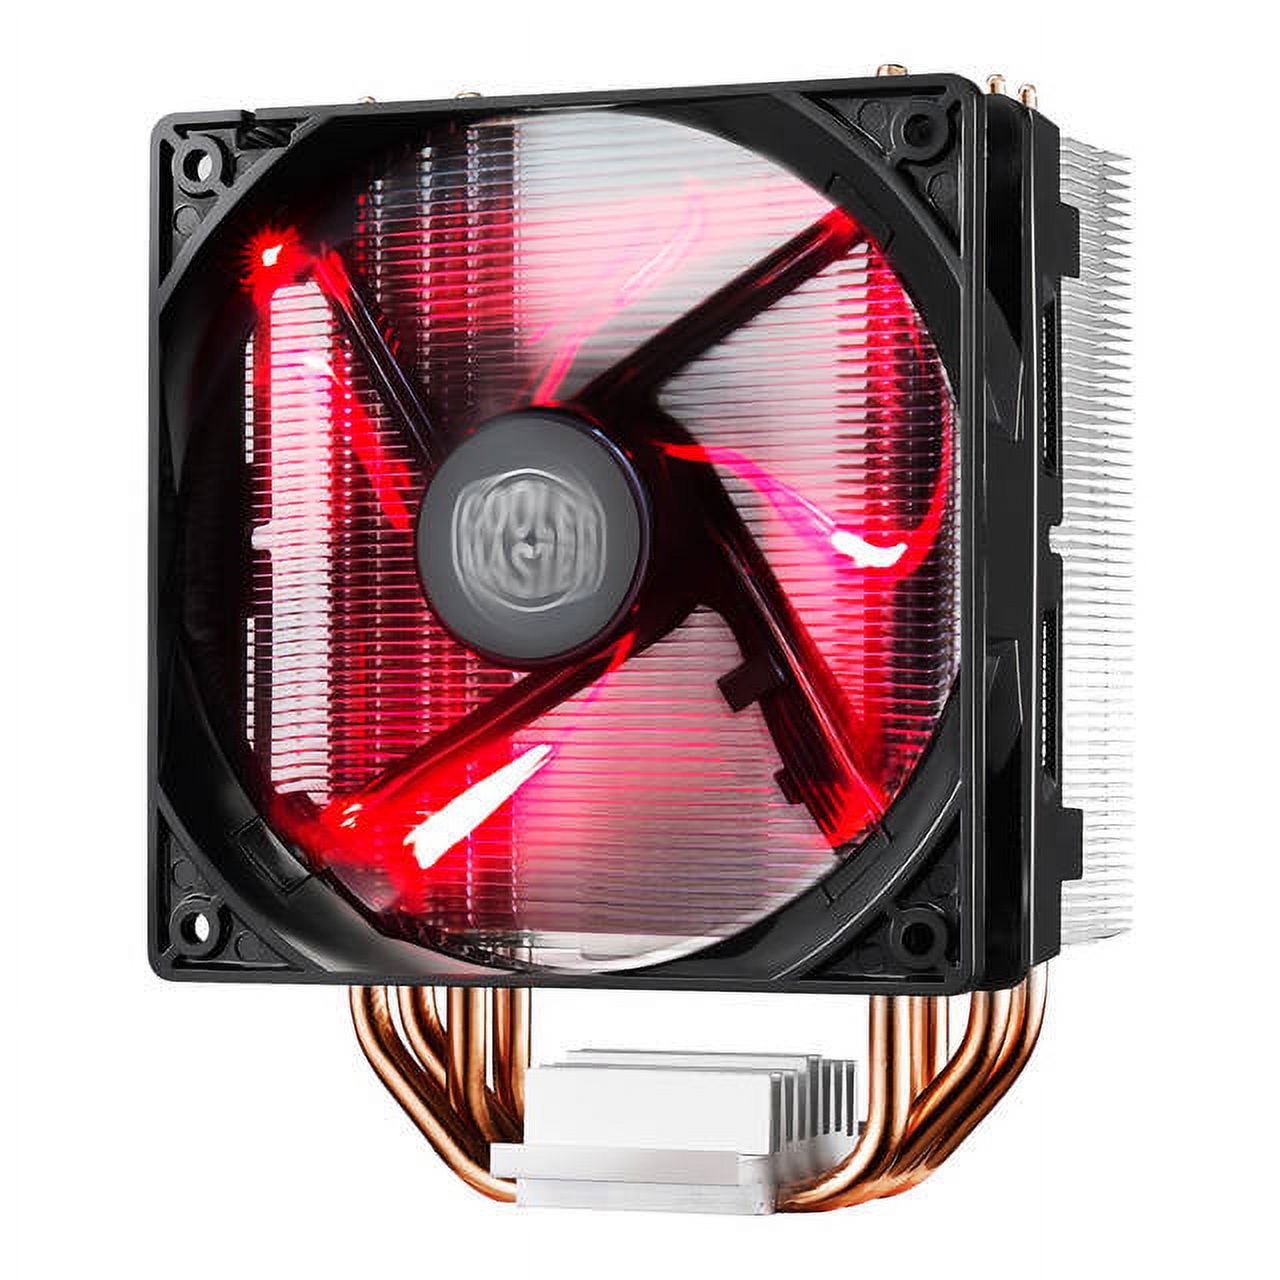 Cooler Master Hyper 212 LED with PWM Fan, Four Direct Contact Heatpipes, Unique Fan Blade Design, Red LEDs, Optimized Bracket - image 1 of 8